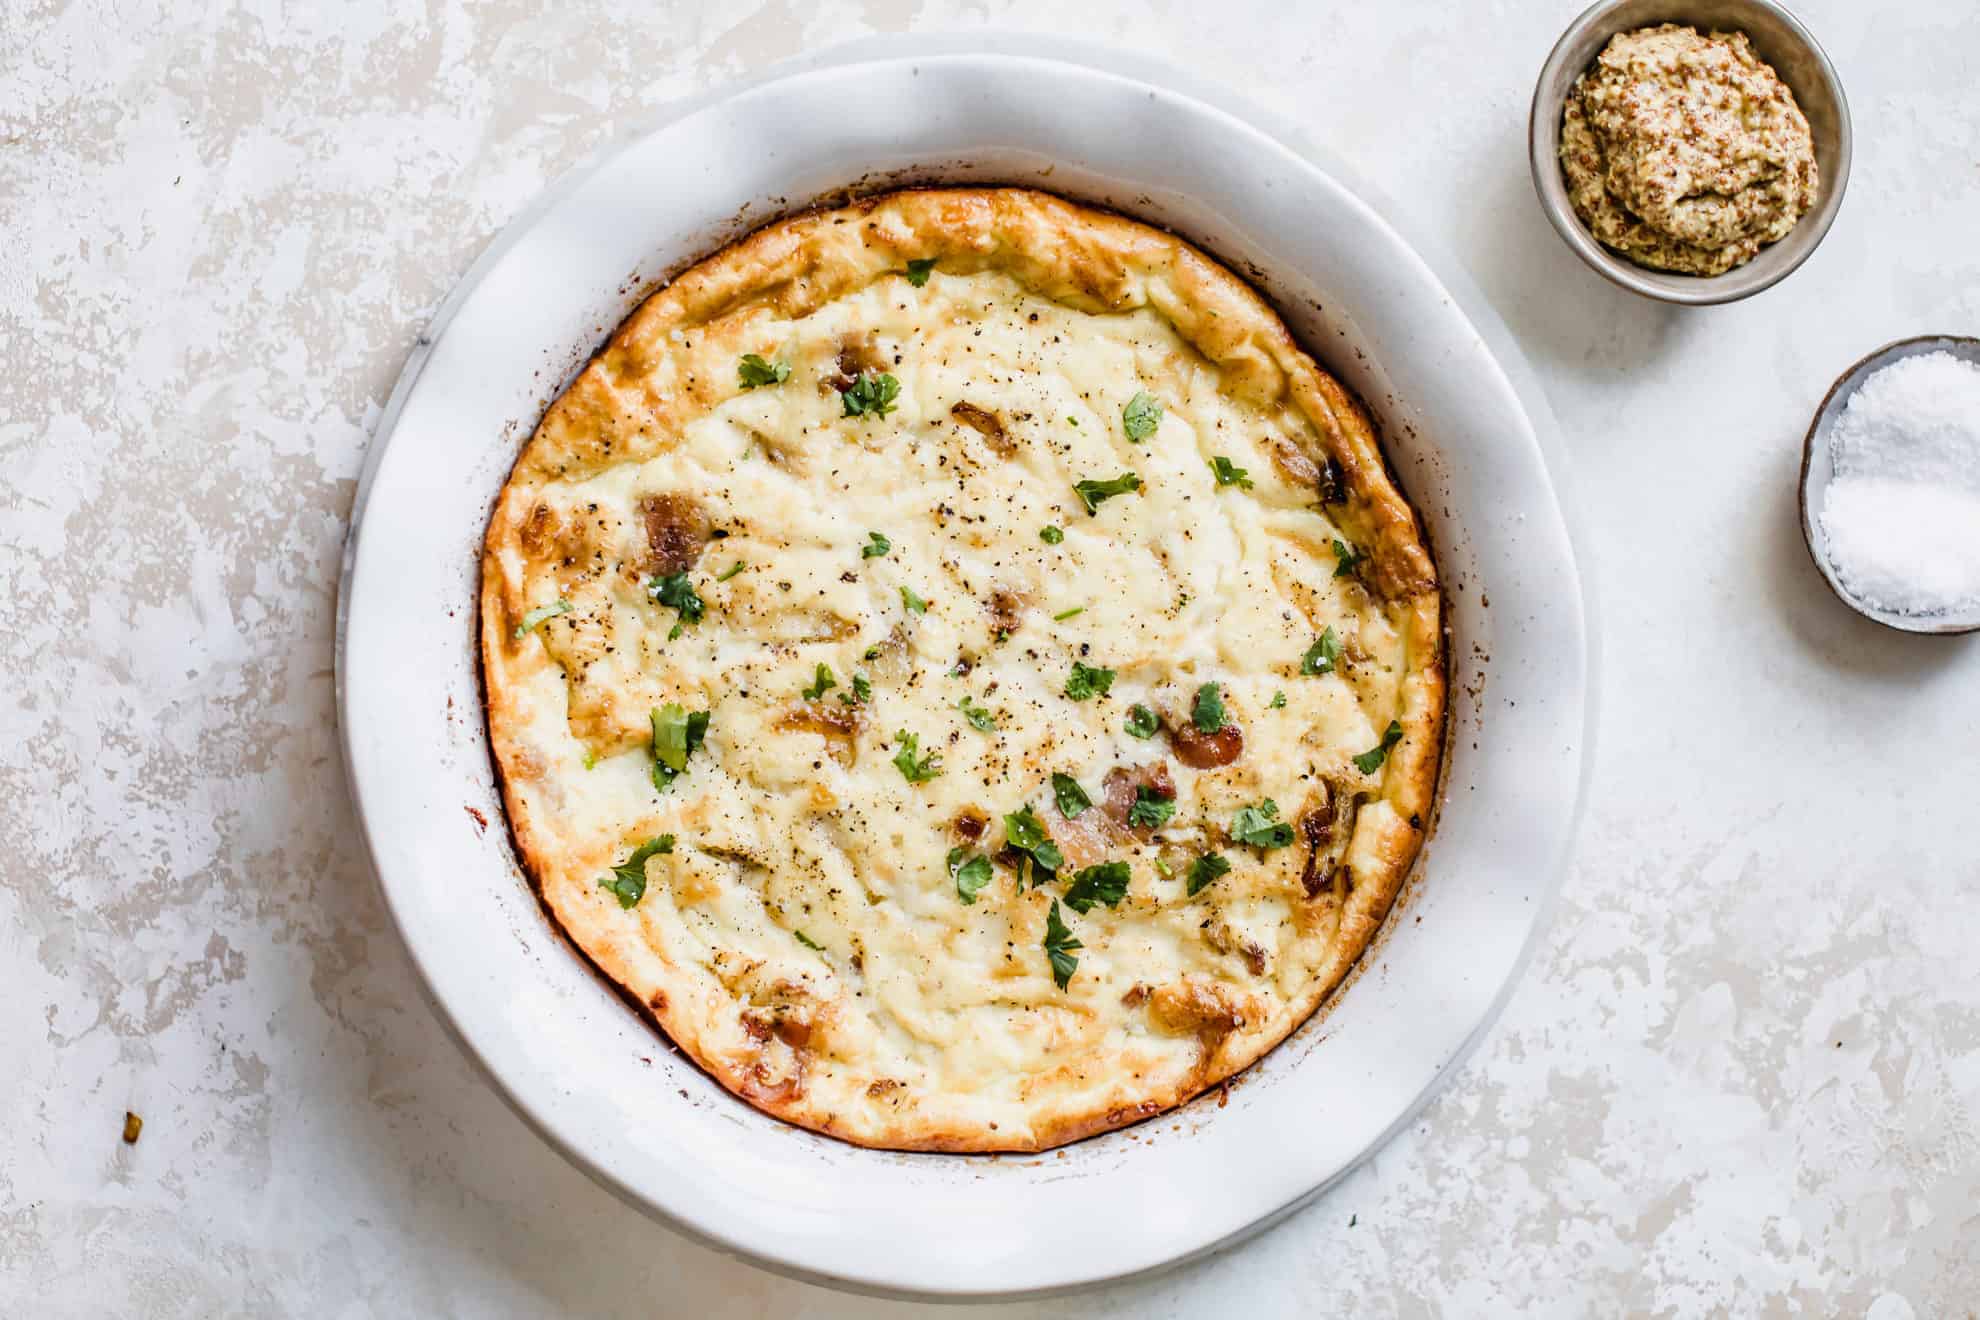 This is an overhead image of a baked crustless quiche dish on a white counter. The quiche has bits of chopped herbs and small bowls of mustard and salt to the side. 